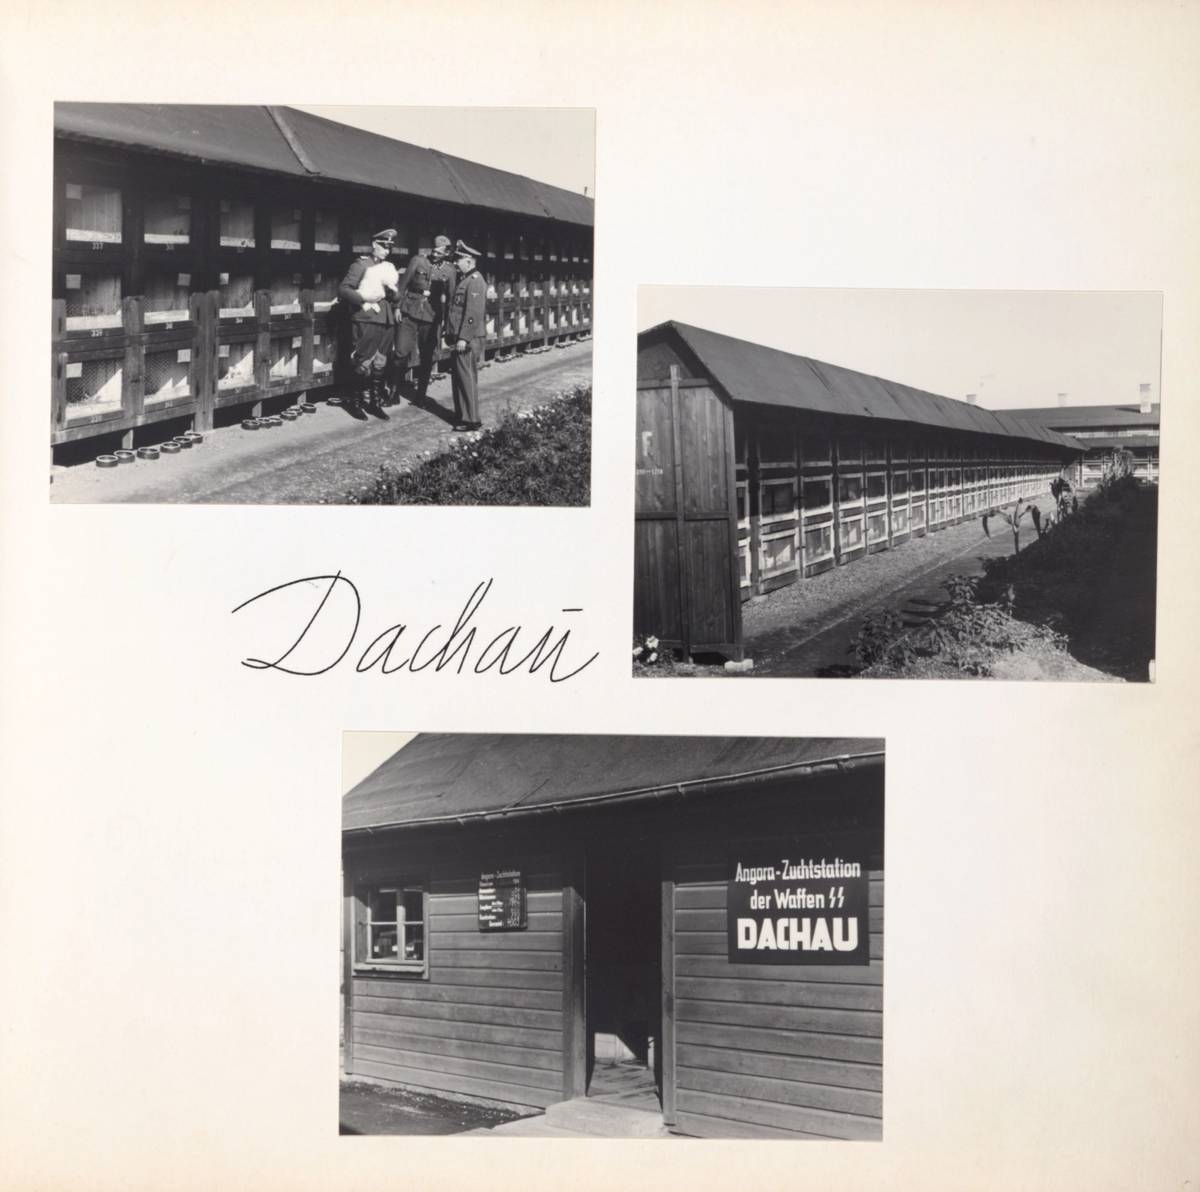 Images of the rabbit hutches at Dachau concentration camp, circa 1943, from Himmler's Angora Album